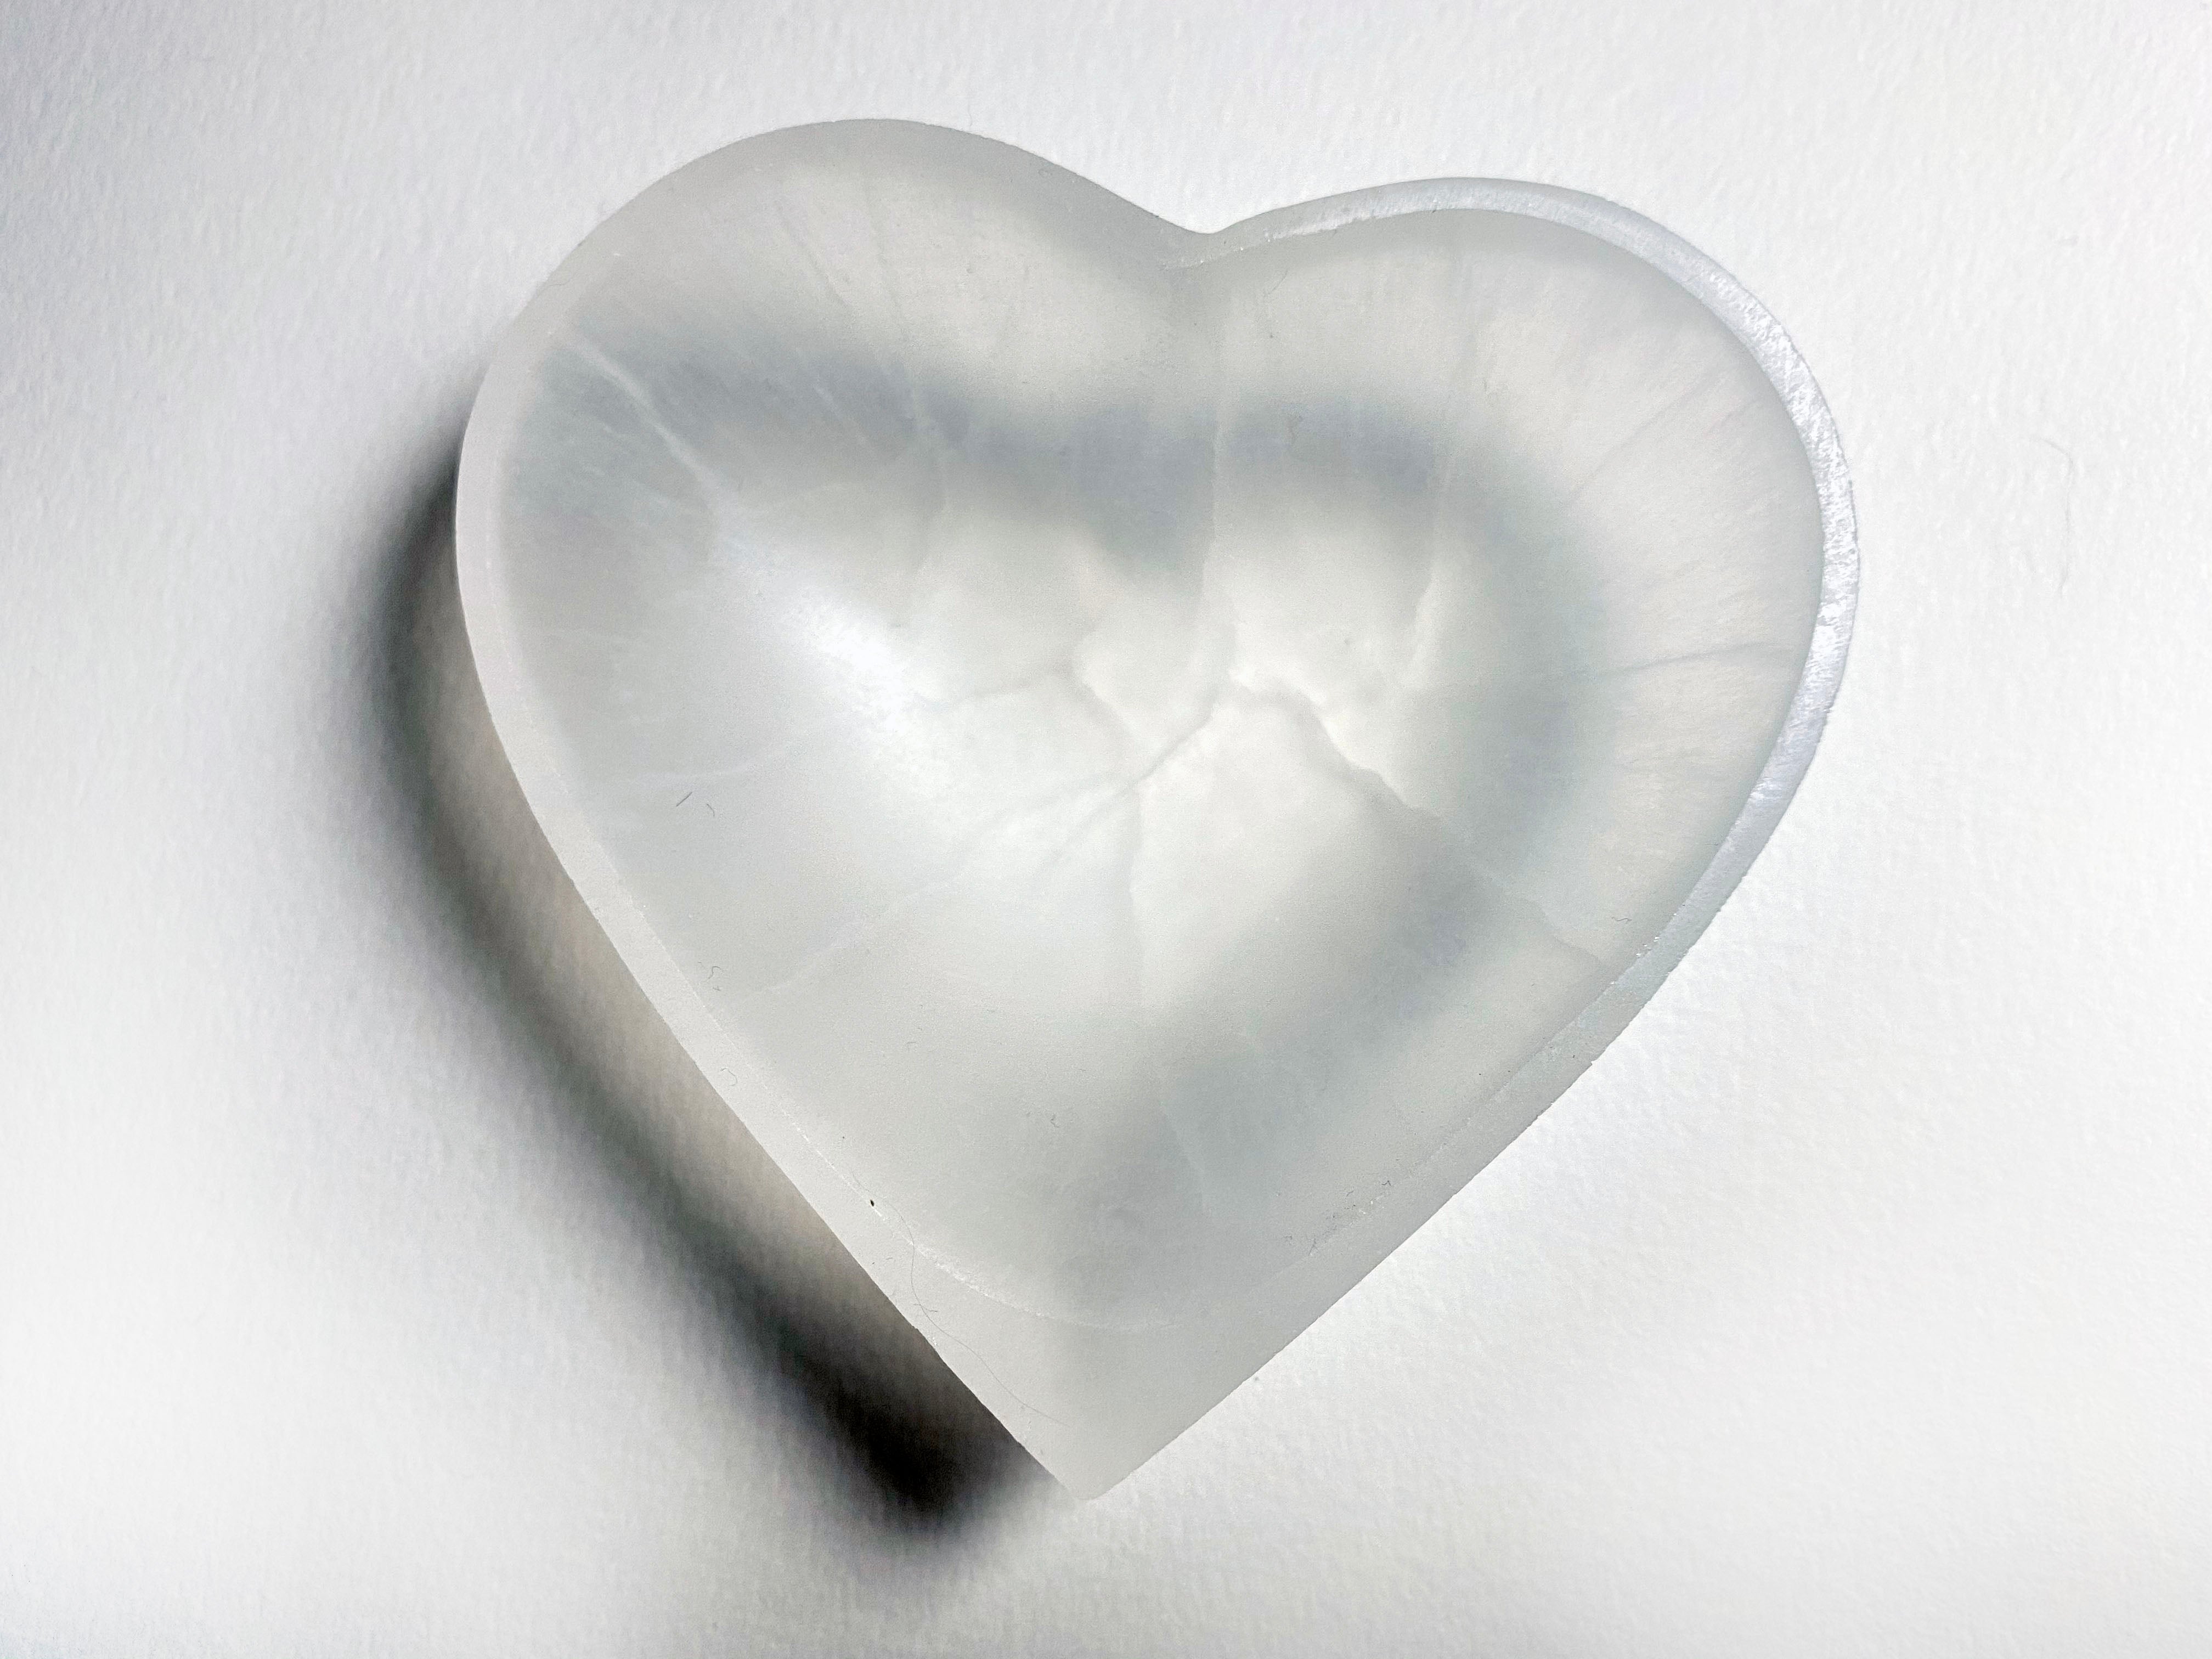 Selenite Cleanse & Charge Heart Bowl